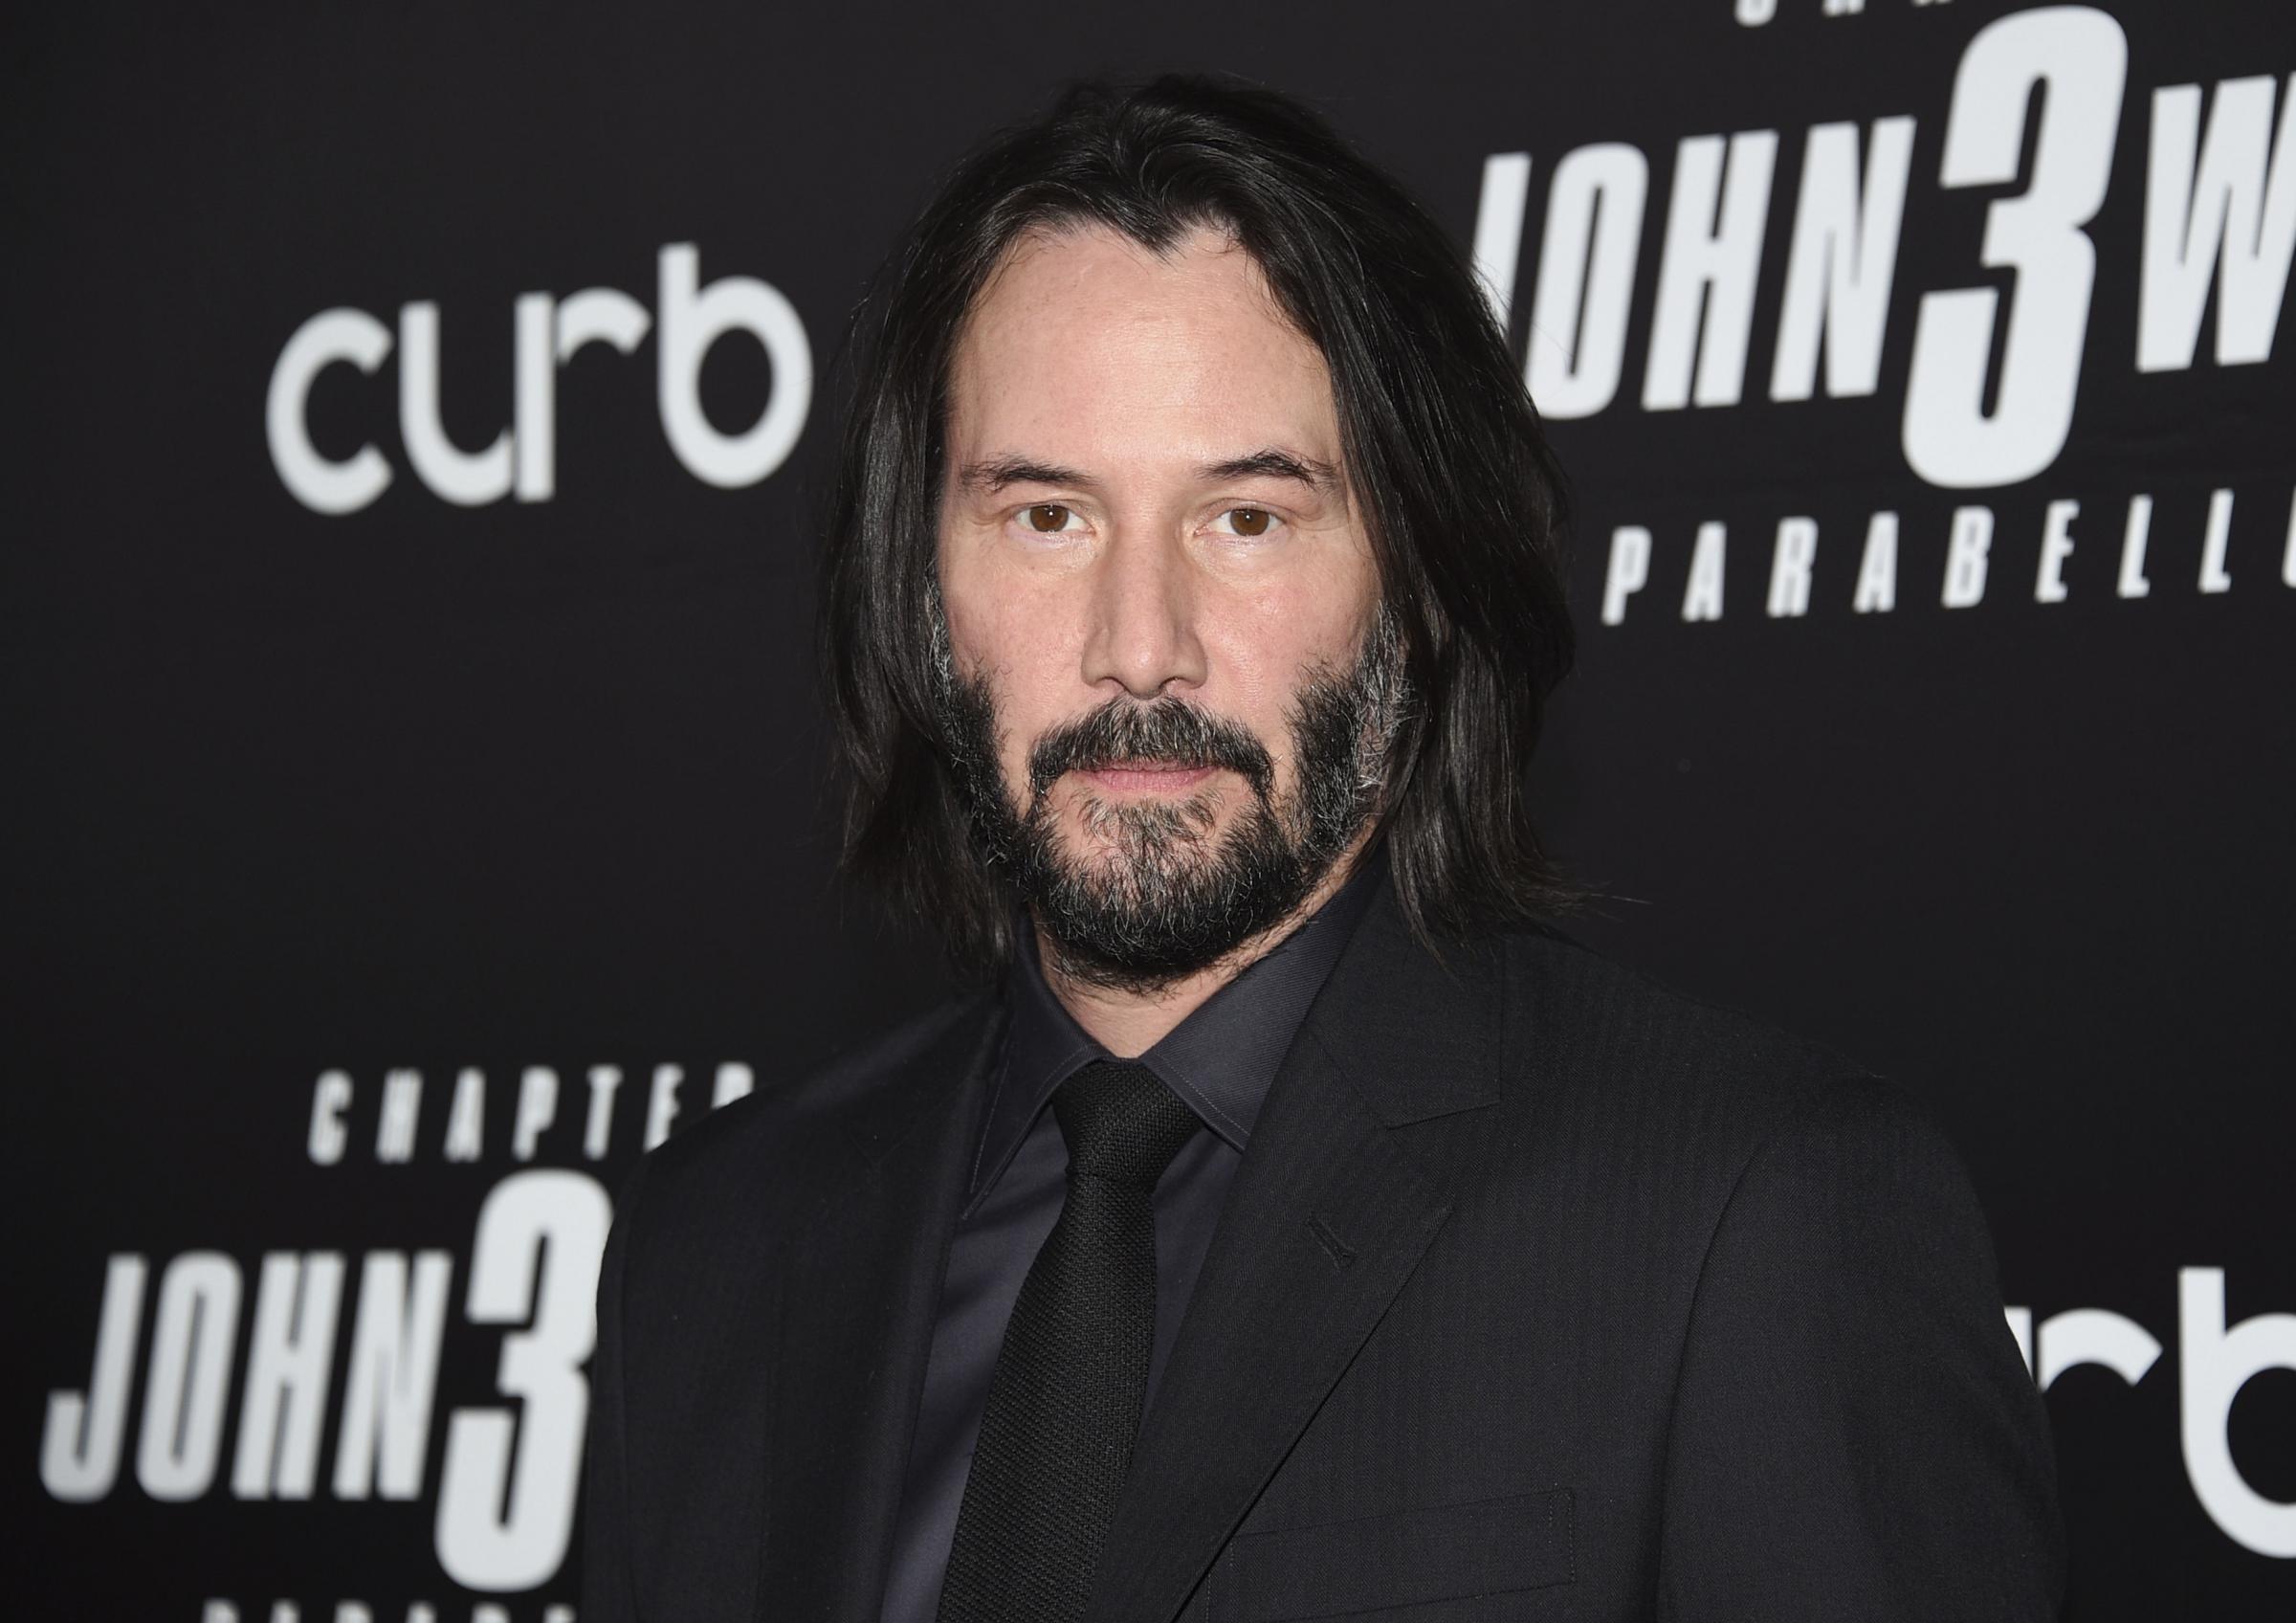 Is this Brightonian a lookalike for Keanu Reeves?